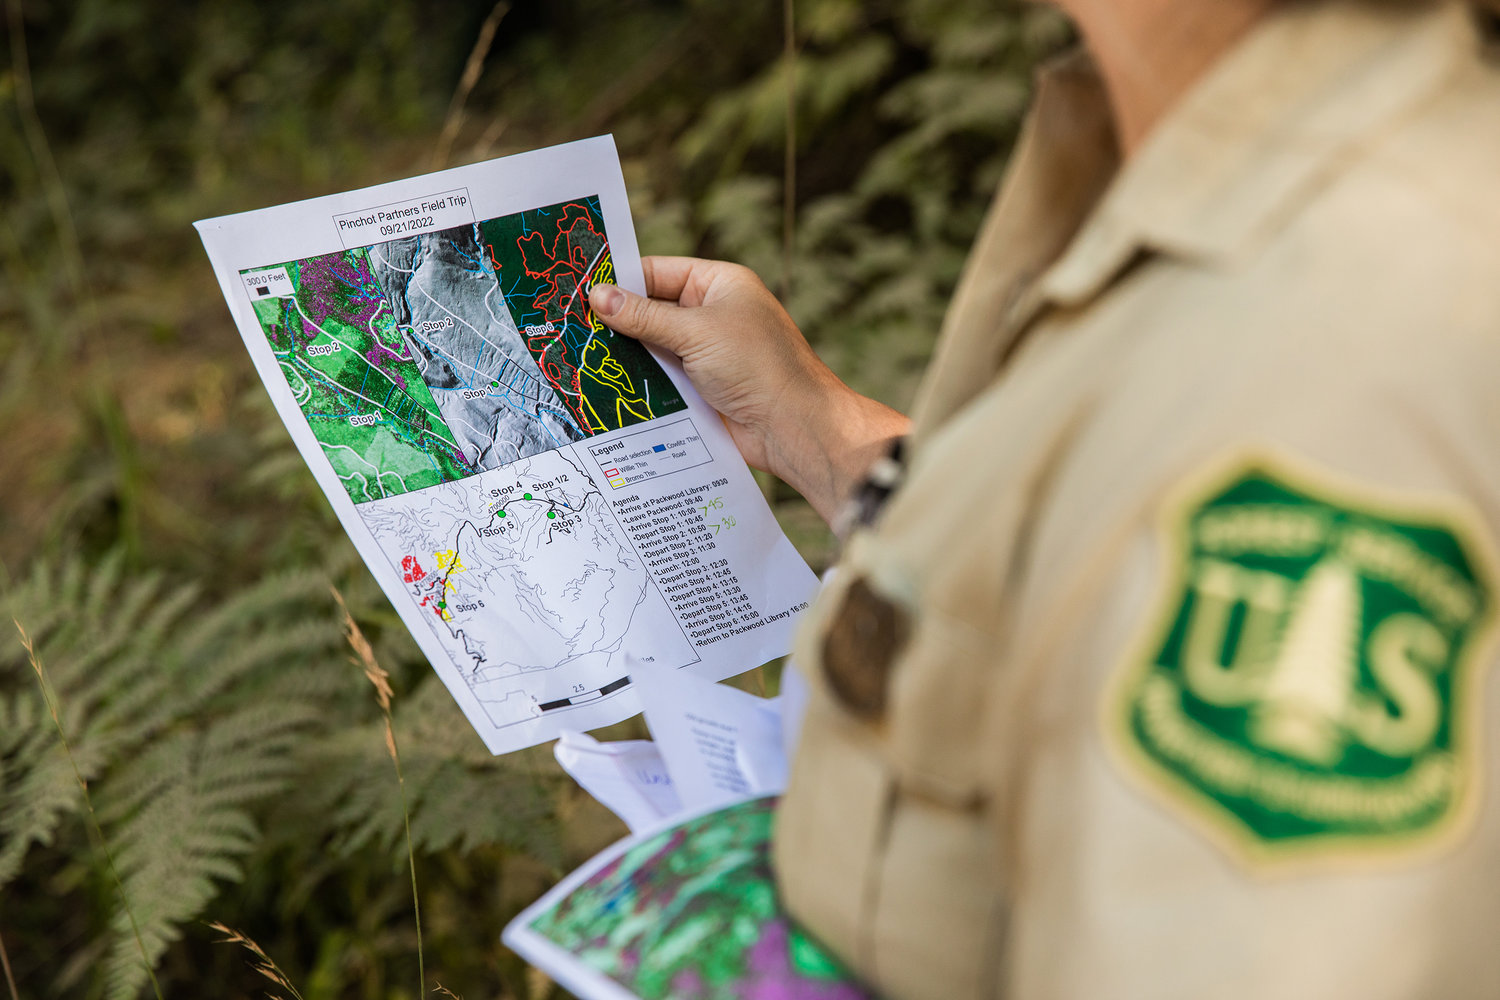 District Silviculturist Cheyenne Adamonis looks at maps during a Pinchot Partners Field Trip around Packwood on Wednesday.